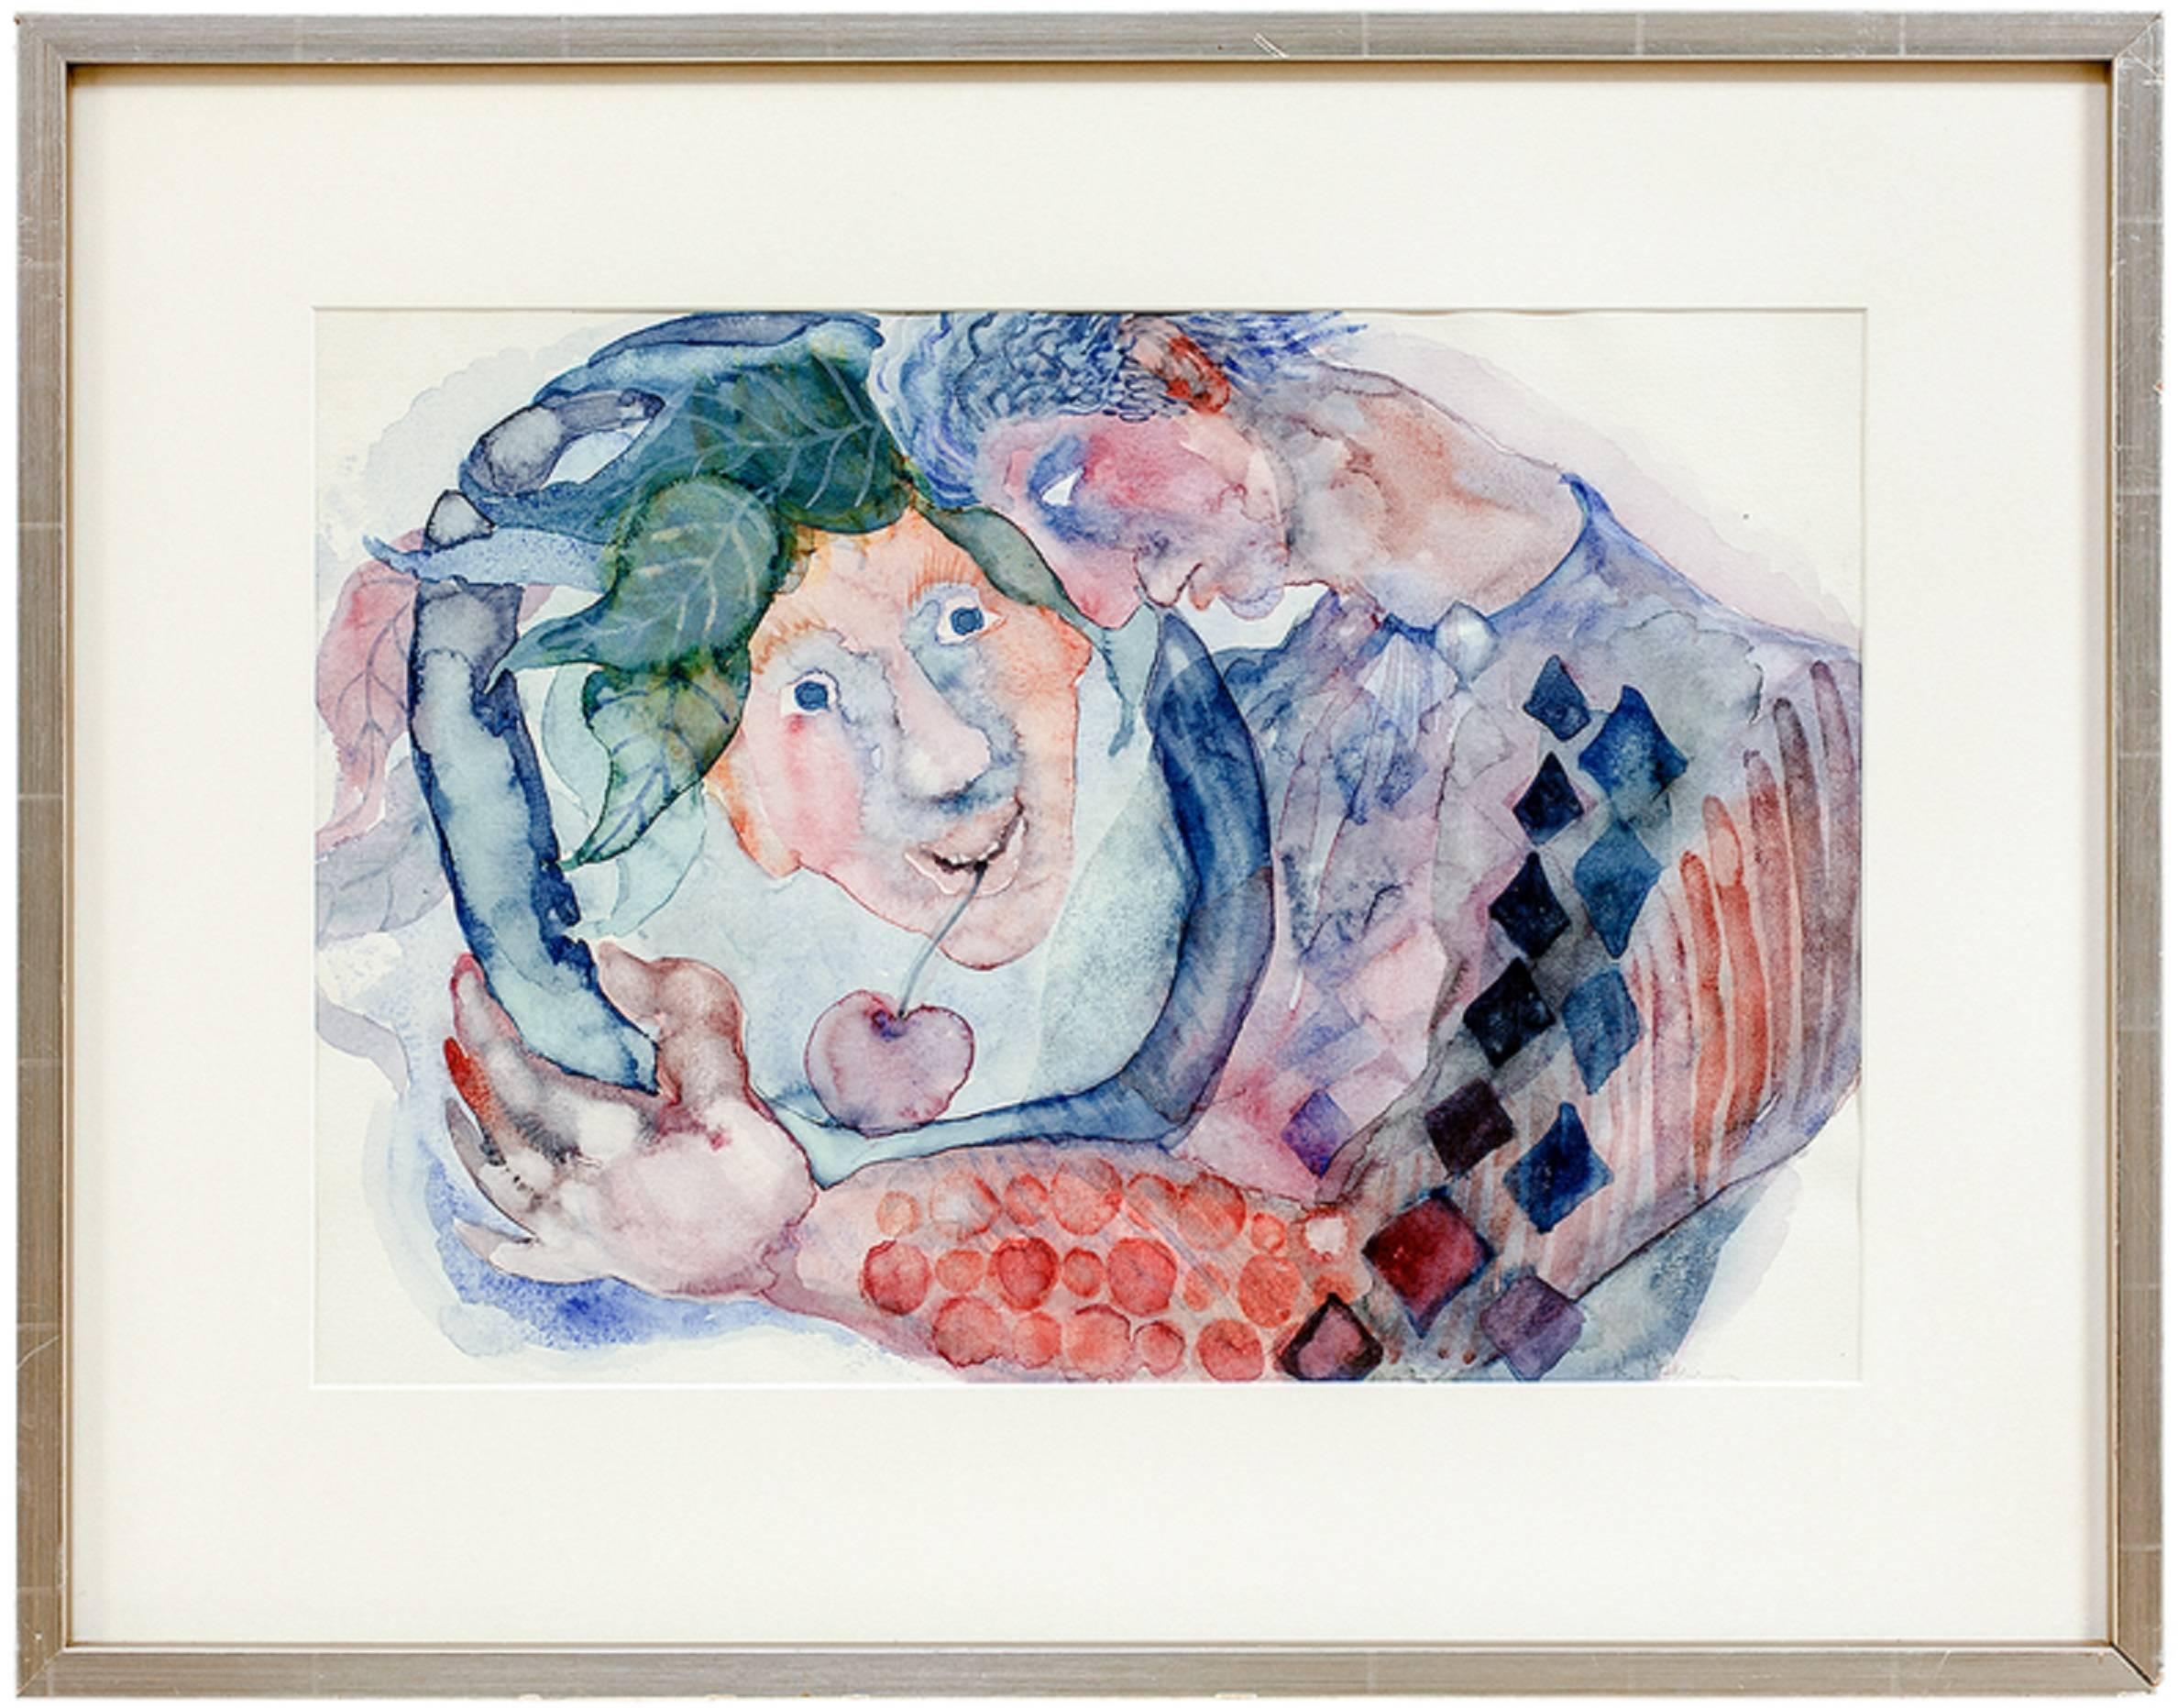 Genre: Expressionist
Subject: Figures
Medium: Watercolor
Surface: Paper
Country: Austria
Dimensions w/Frame: 21